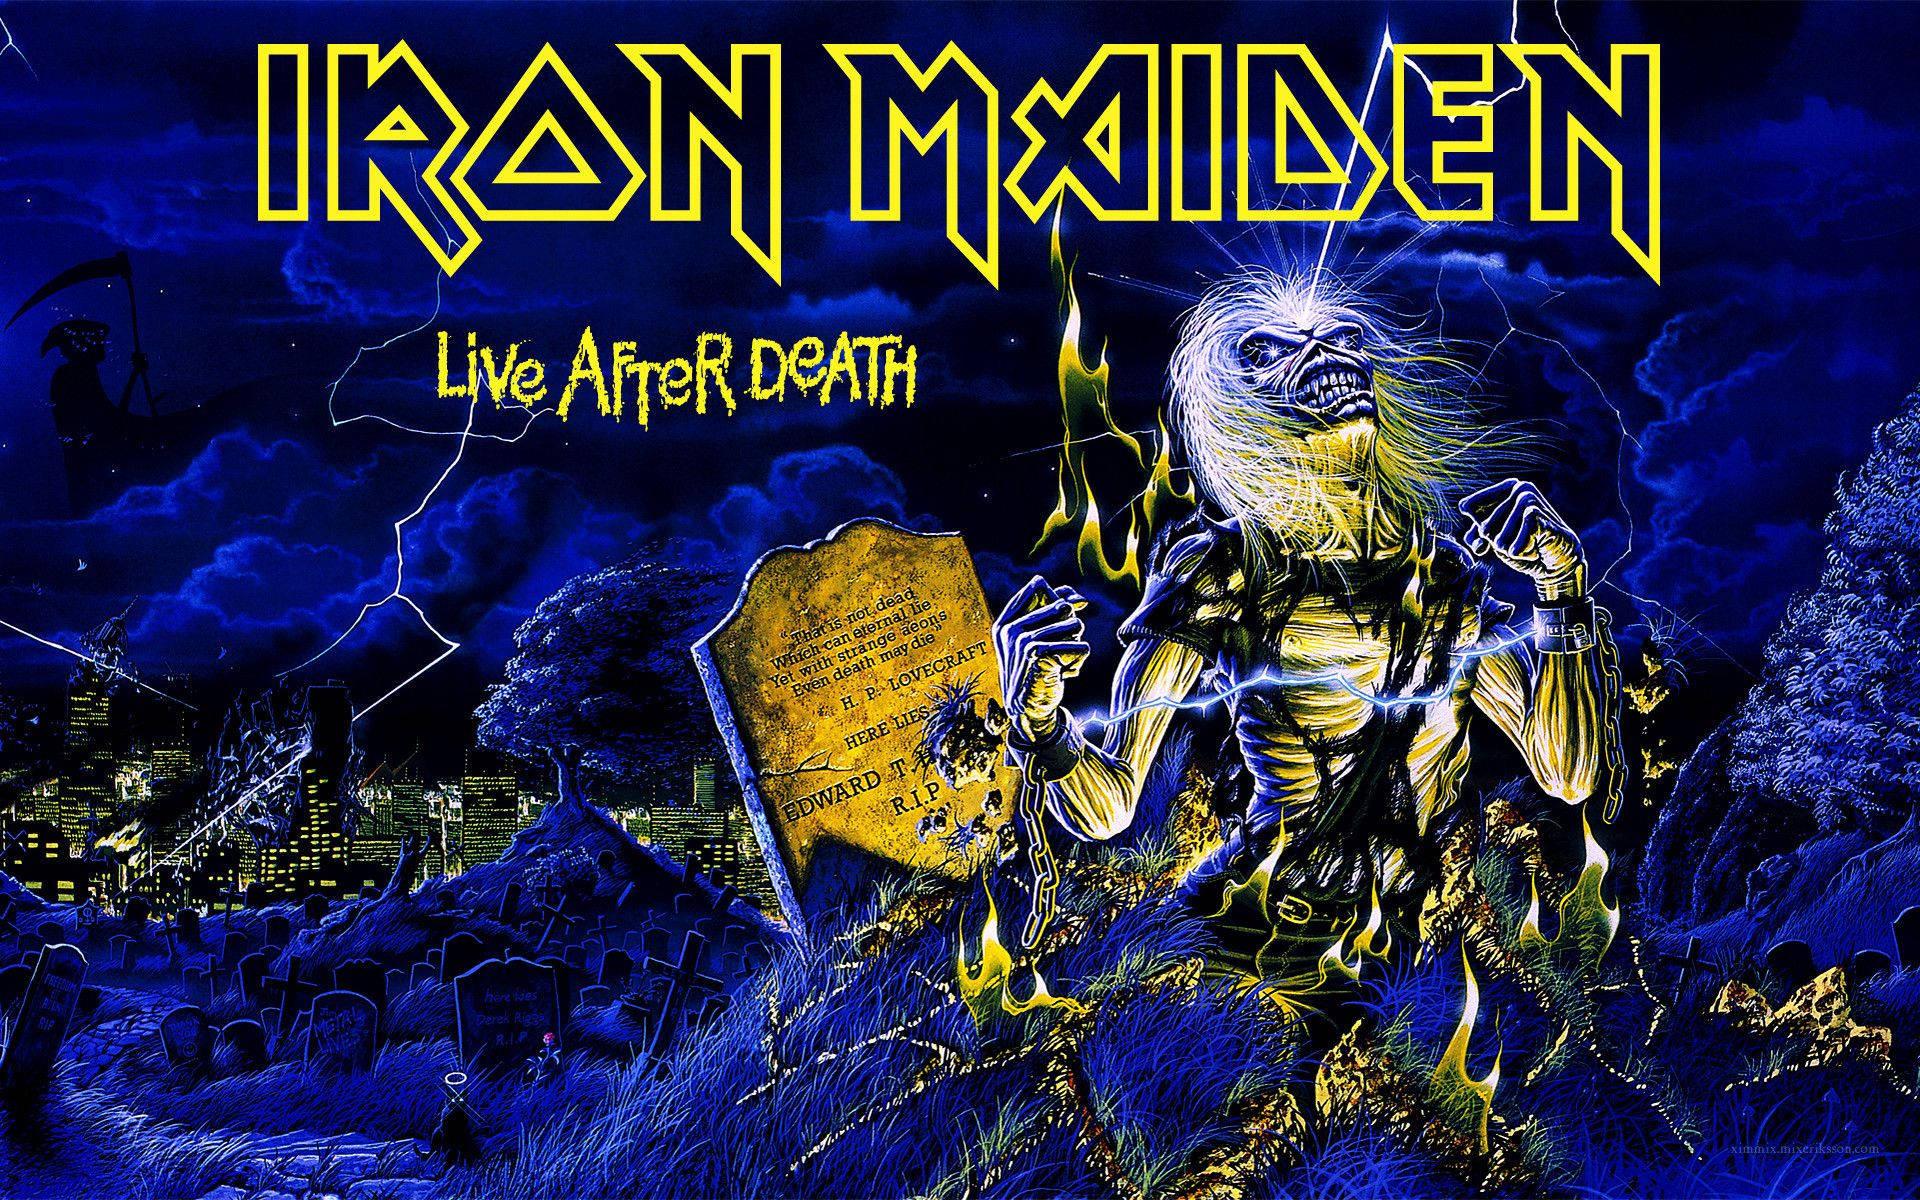 Iron Maiden rocking the stage at Live After Death Wallpaper